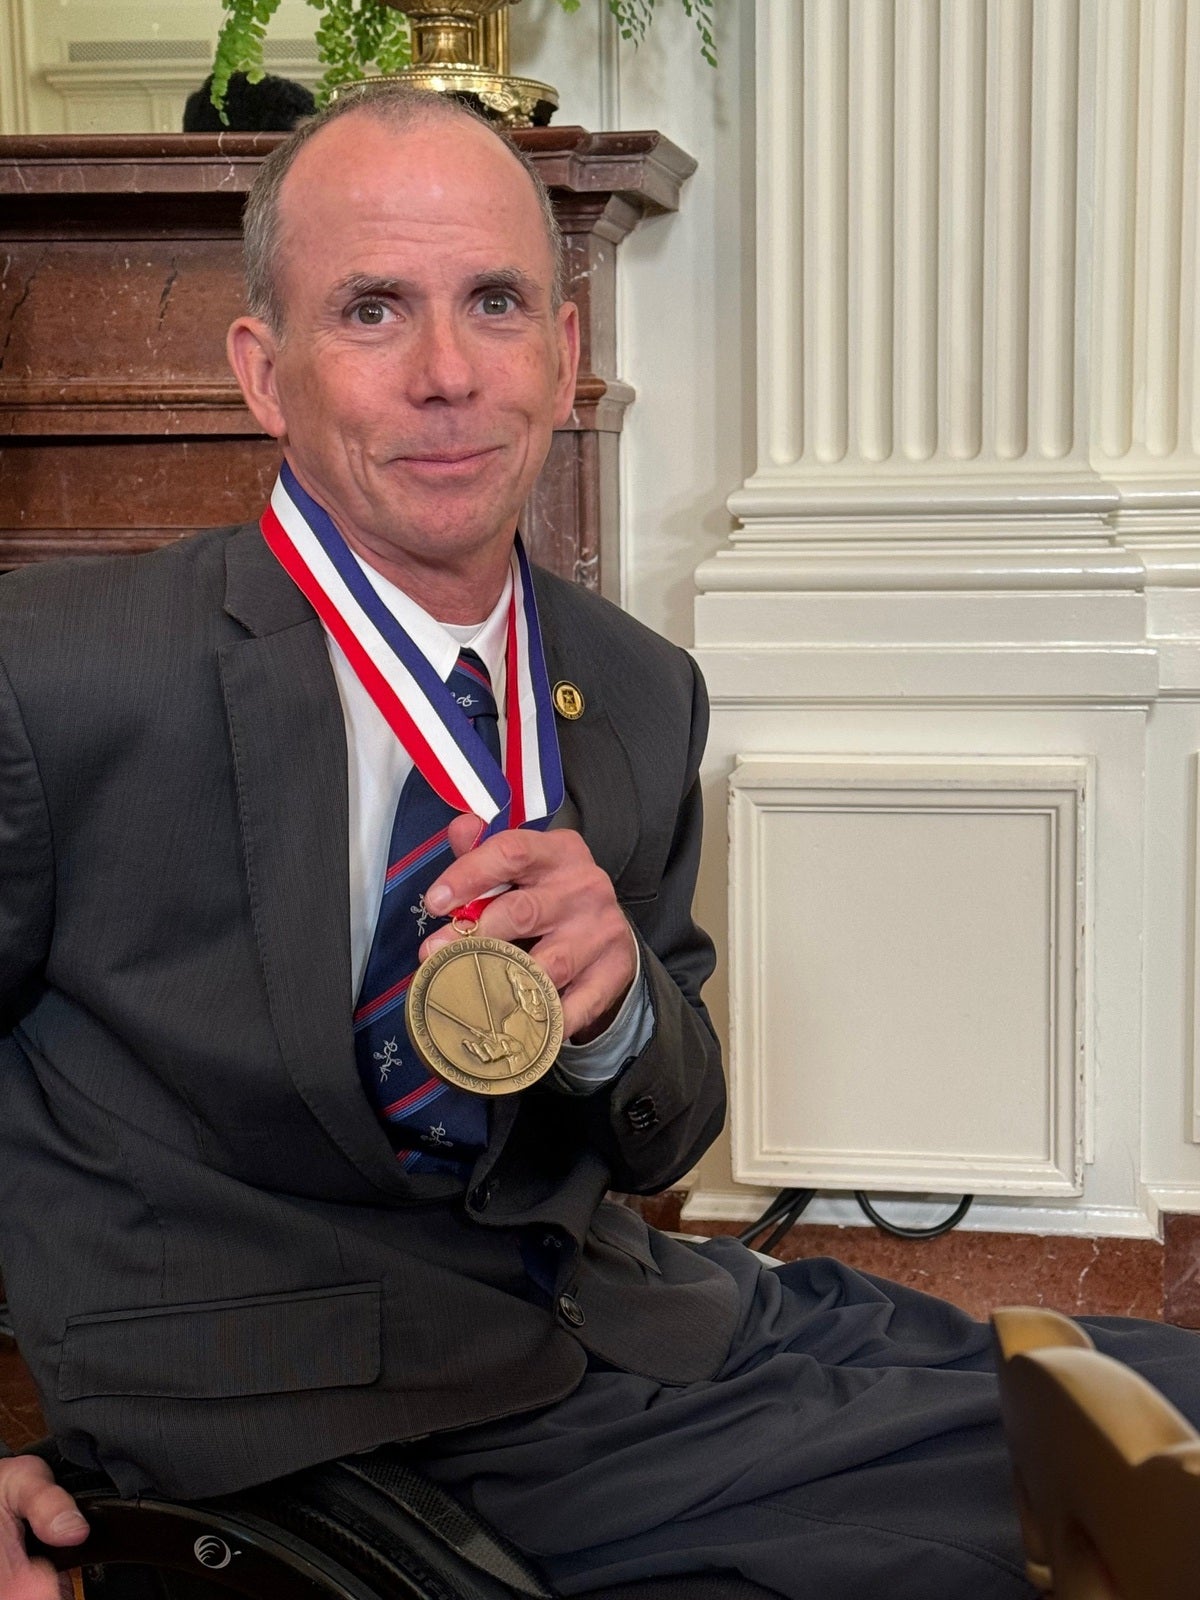 Cooper at the White House ceremony with his National Medal of Technology and Innovation. Photo by Rob Rutenbar.